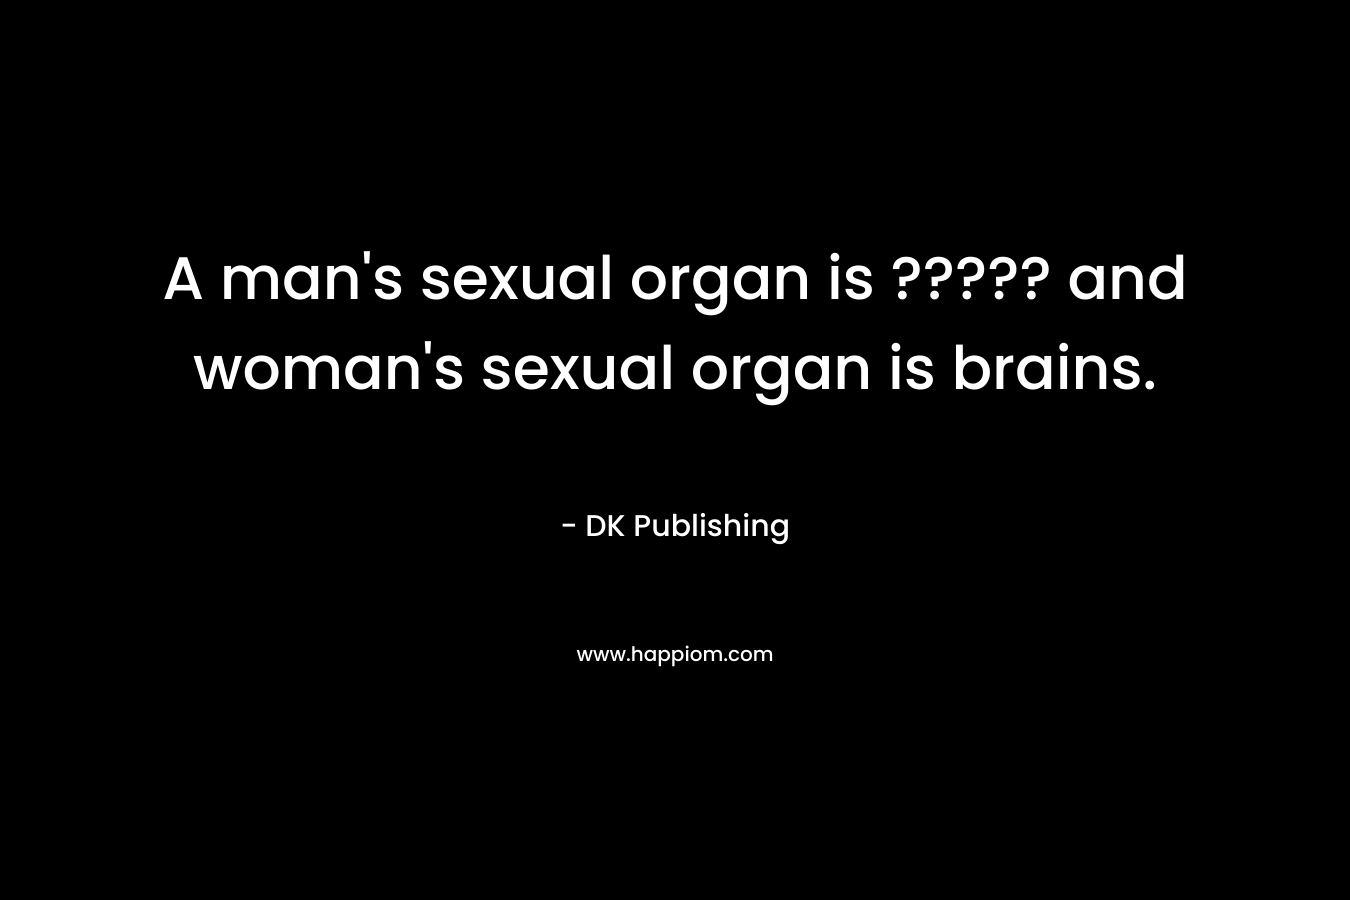 A man's sexual organ is ????? and woman's sexual organ is brains.